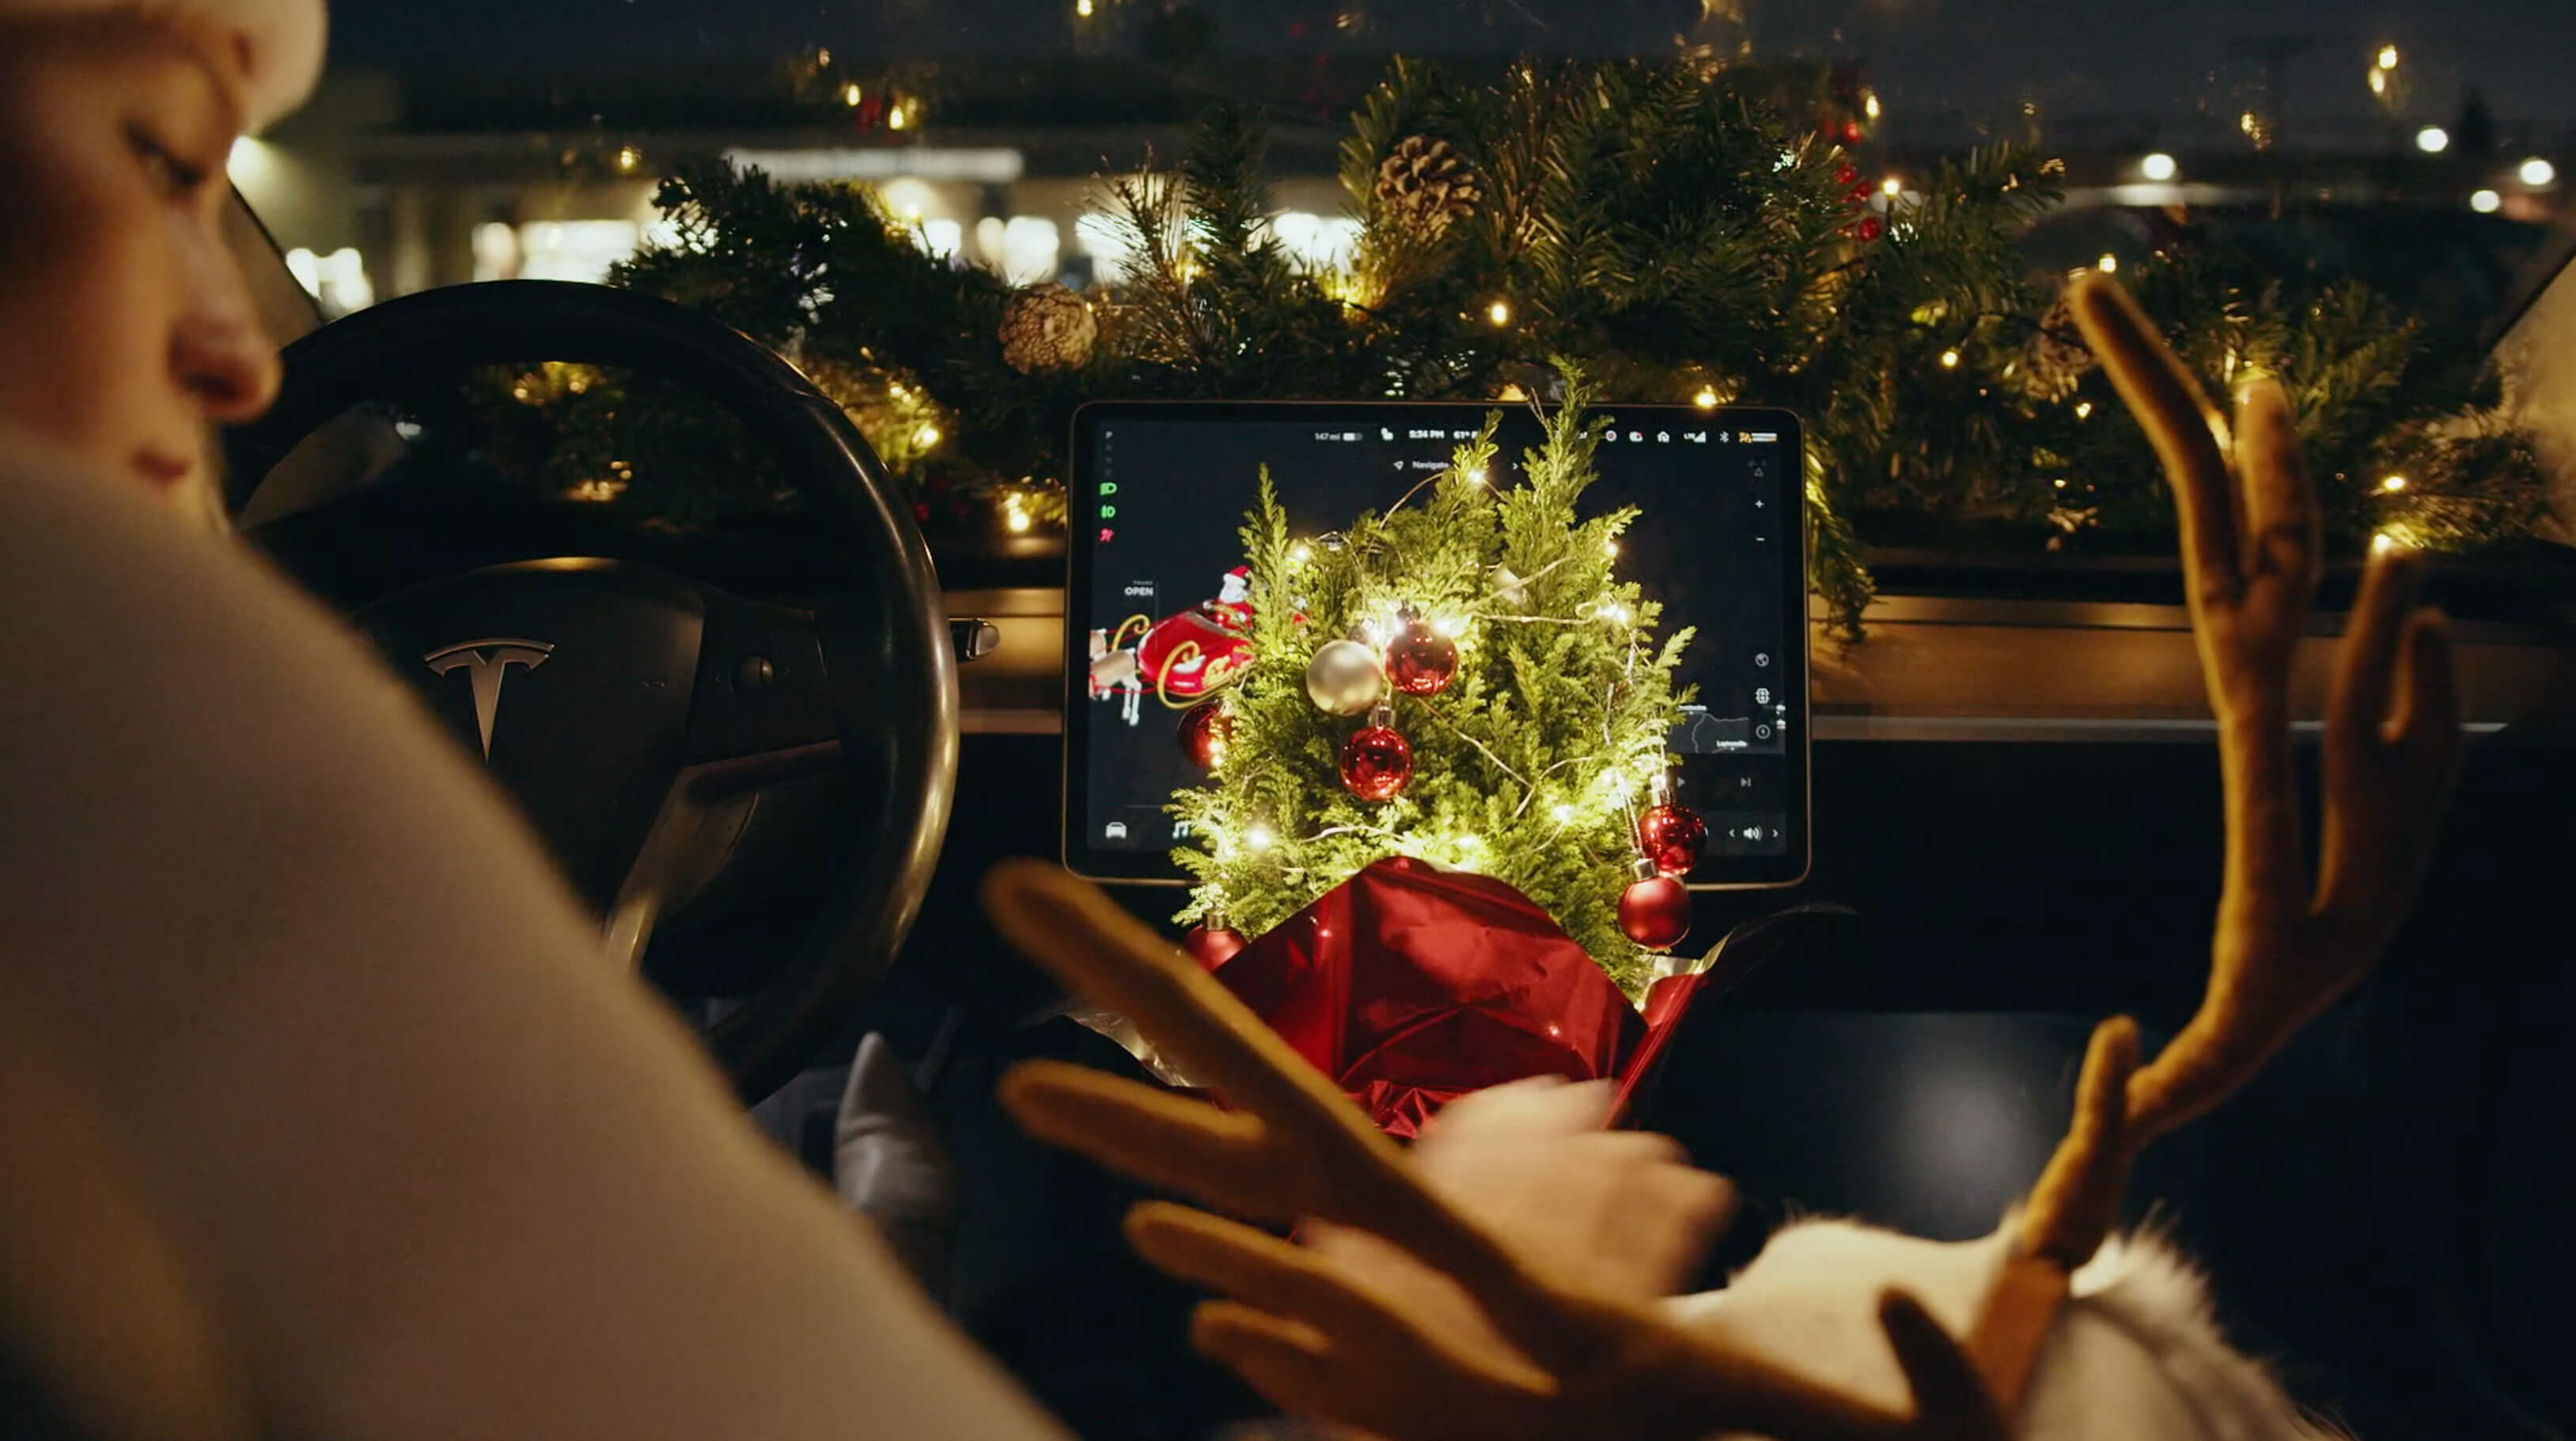 Tesla's Holiday Update brings Christmas a little early for Tesla owners